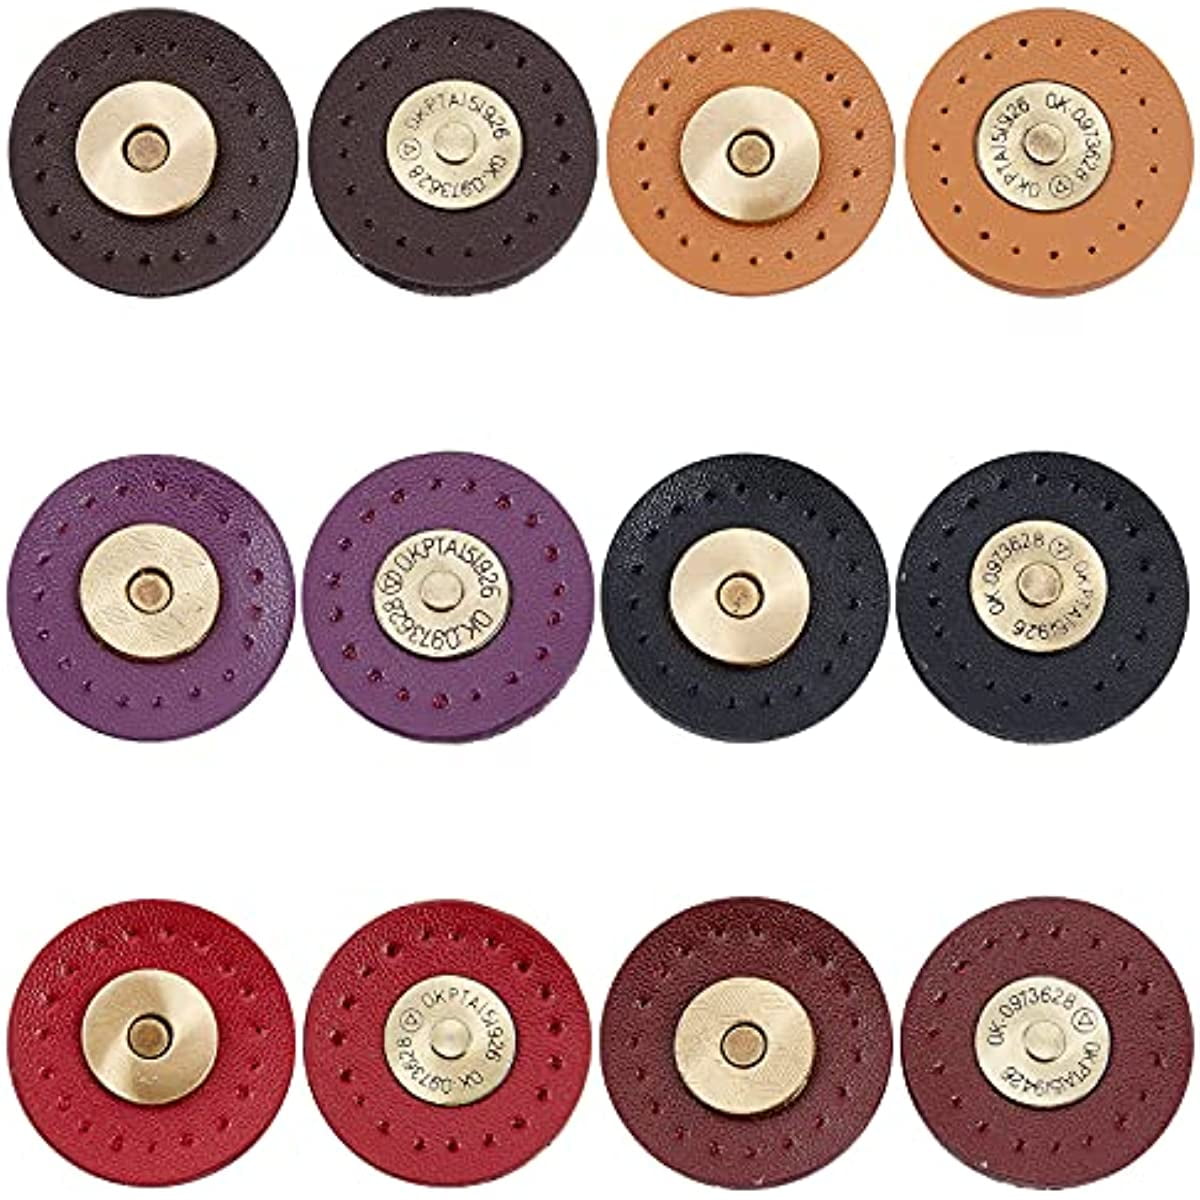 CRAFTMEMORE Thin Magnetic Snap Buttons Quality Strong Clasp for Purse  Sewing Handbags Closures 6 Pack MNS (14mm, Gunmetal)